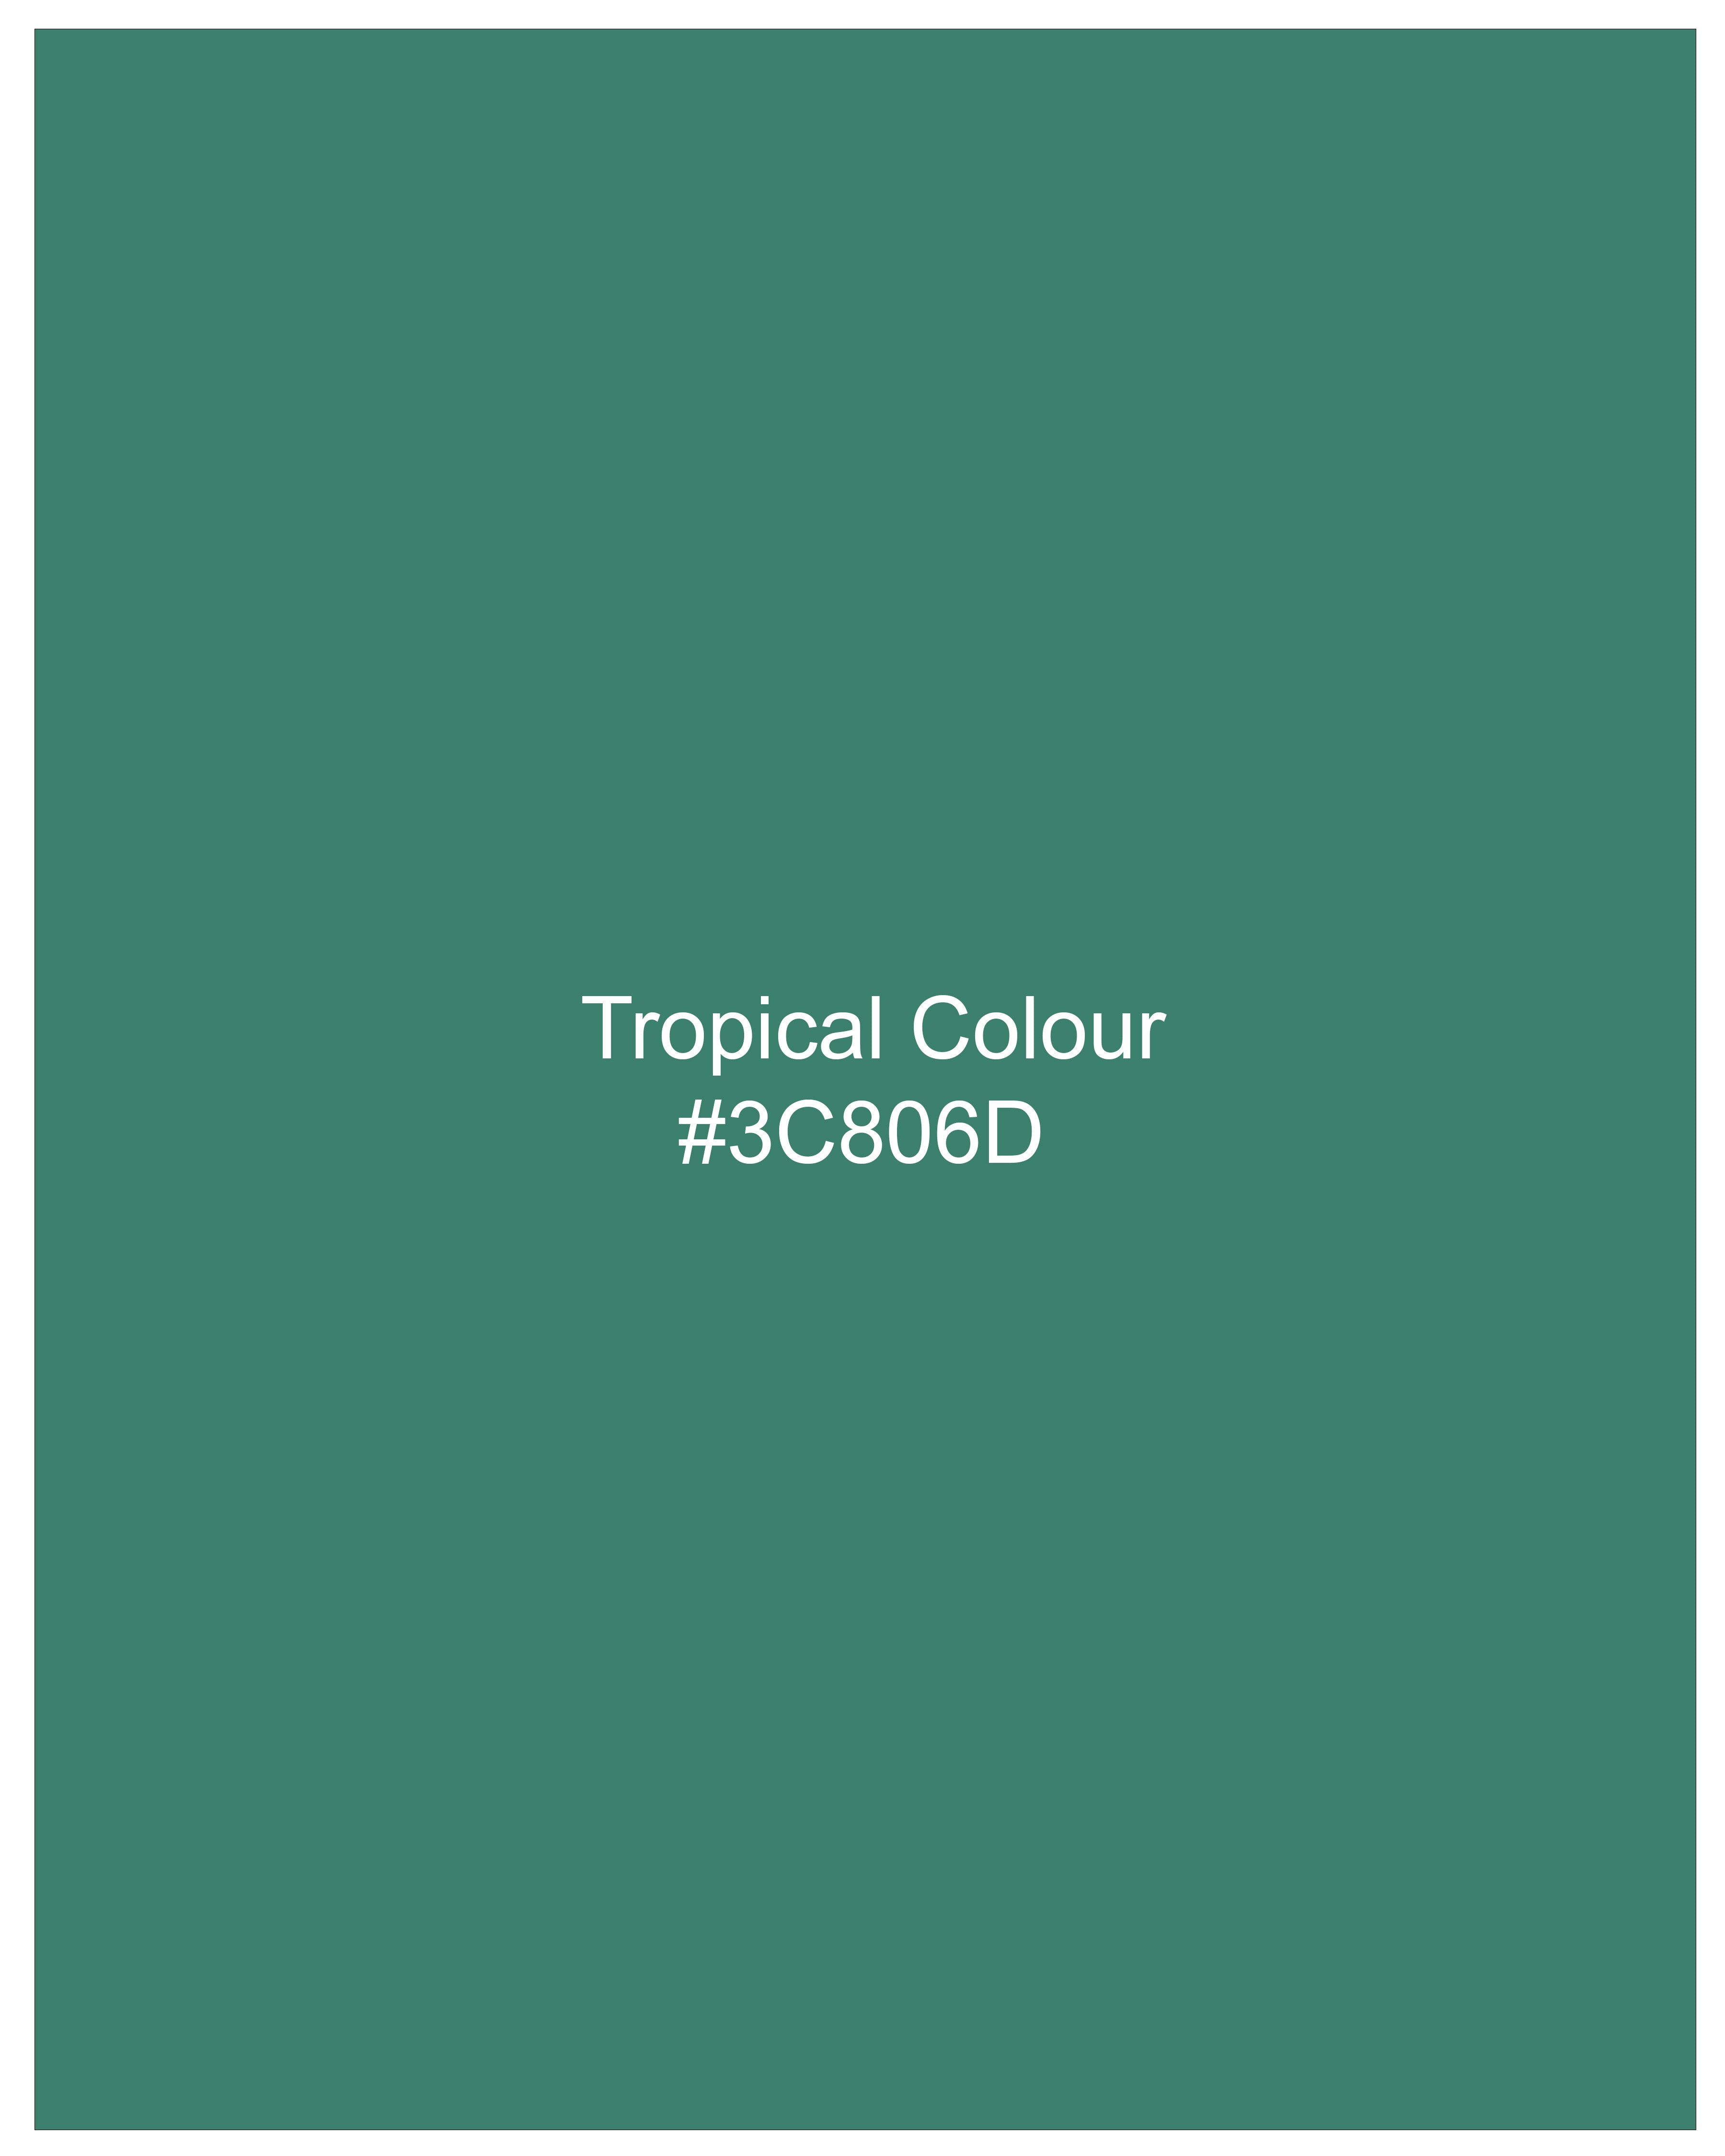 Tropical Green Hand Painted Premium Cotton T-shirt TS005-W006-S, TS005-W006-M, TS005-W006-L, TS005-W006-XL, TS005-W006-XXL